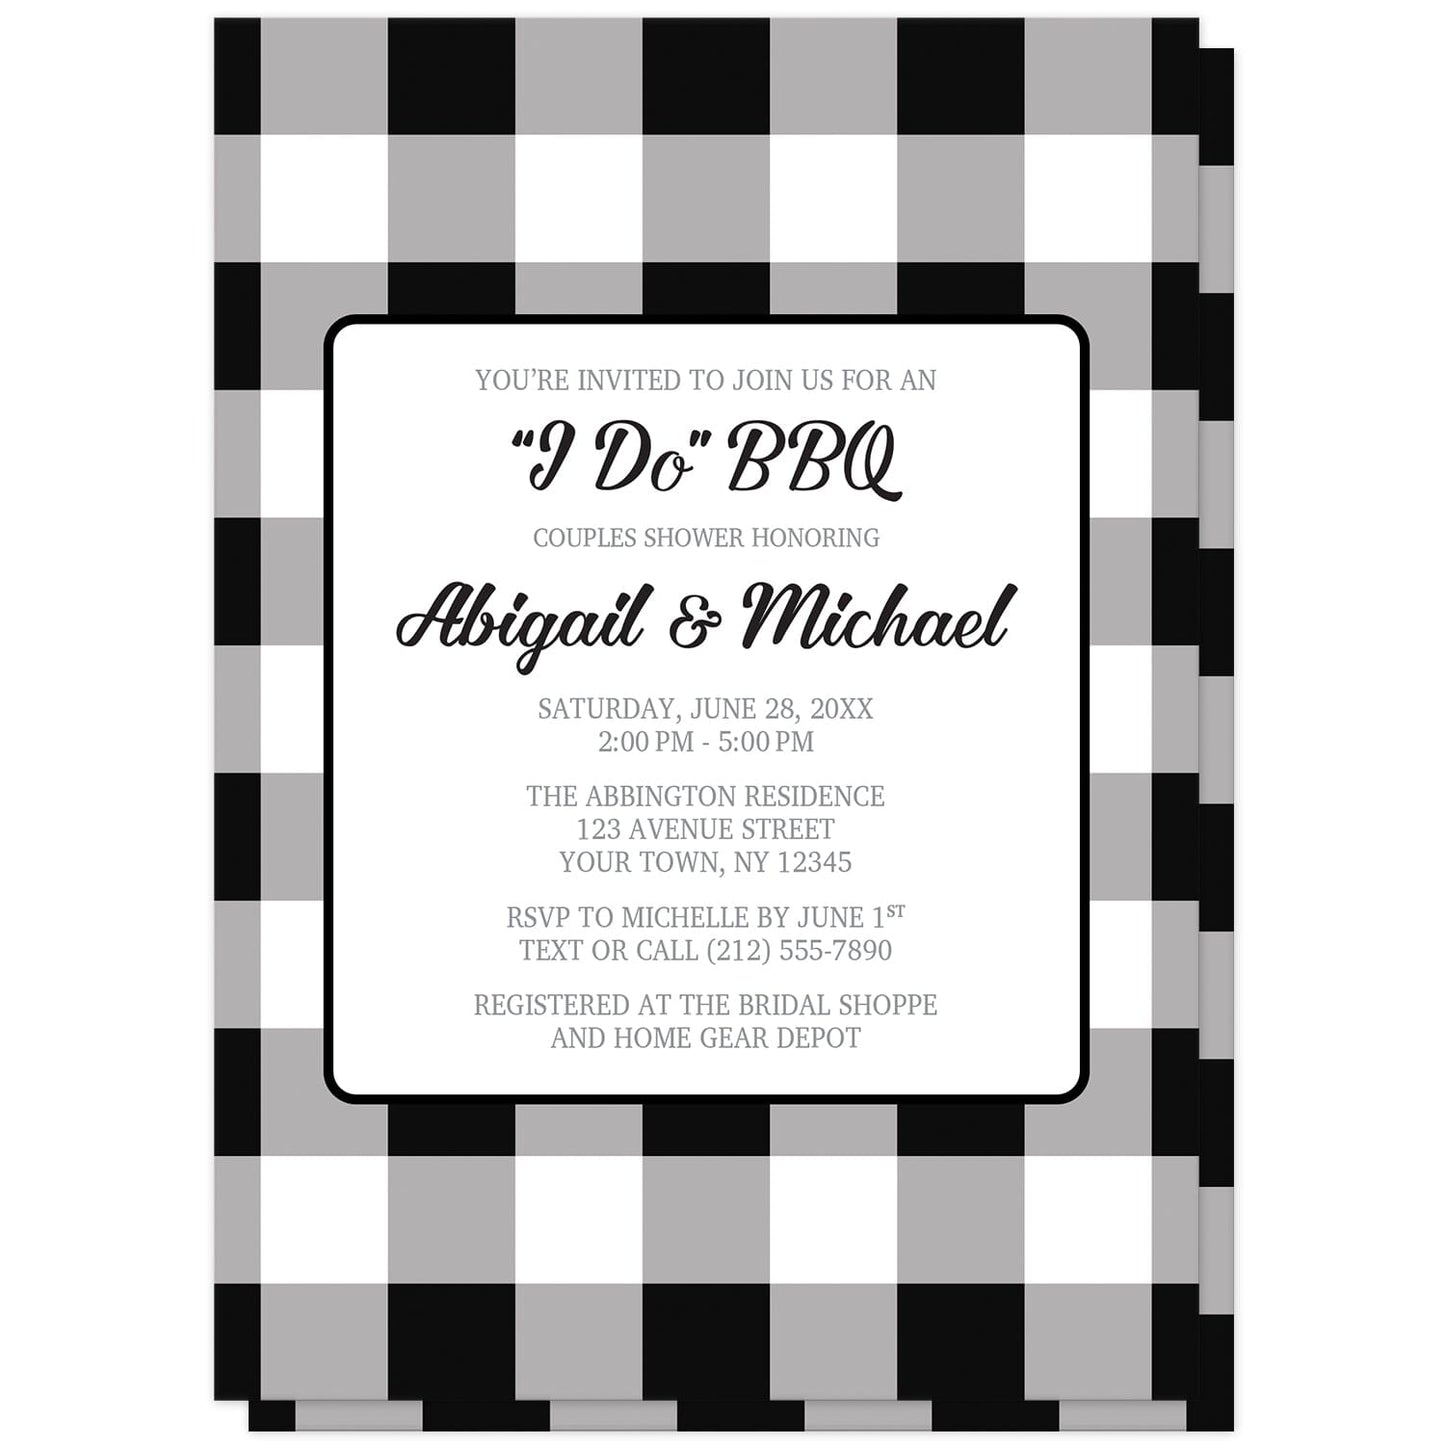 Black and White Buffalo Plaid I Do BBQ Couples Shower Invitations at Artistically Invited. Black and white buffalo plaid I DO BBQ couples shower invitations with a large black and white buffalo plaid (buffalo check) pattern background. Your personalized couples shower celebration details are custom printed in black and gray inside a white rectangular area in the middle over the buffalo plaid background design. The back side of these invites are printed with the same pattern background as the front side.